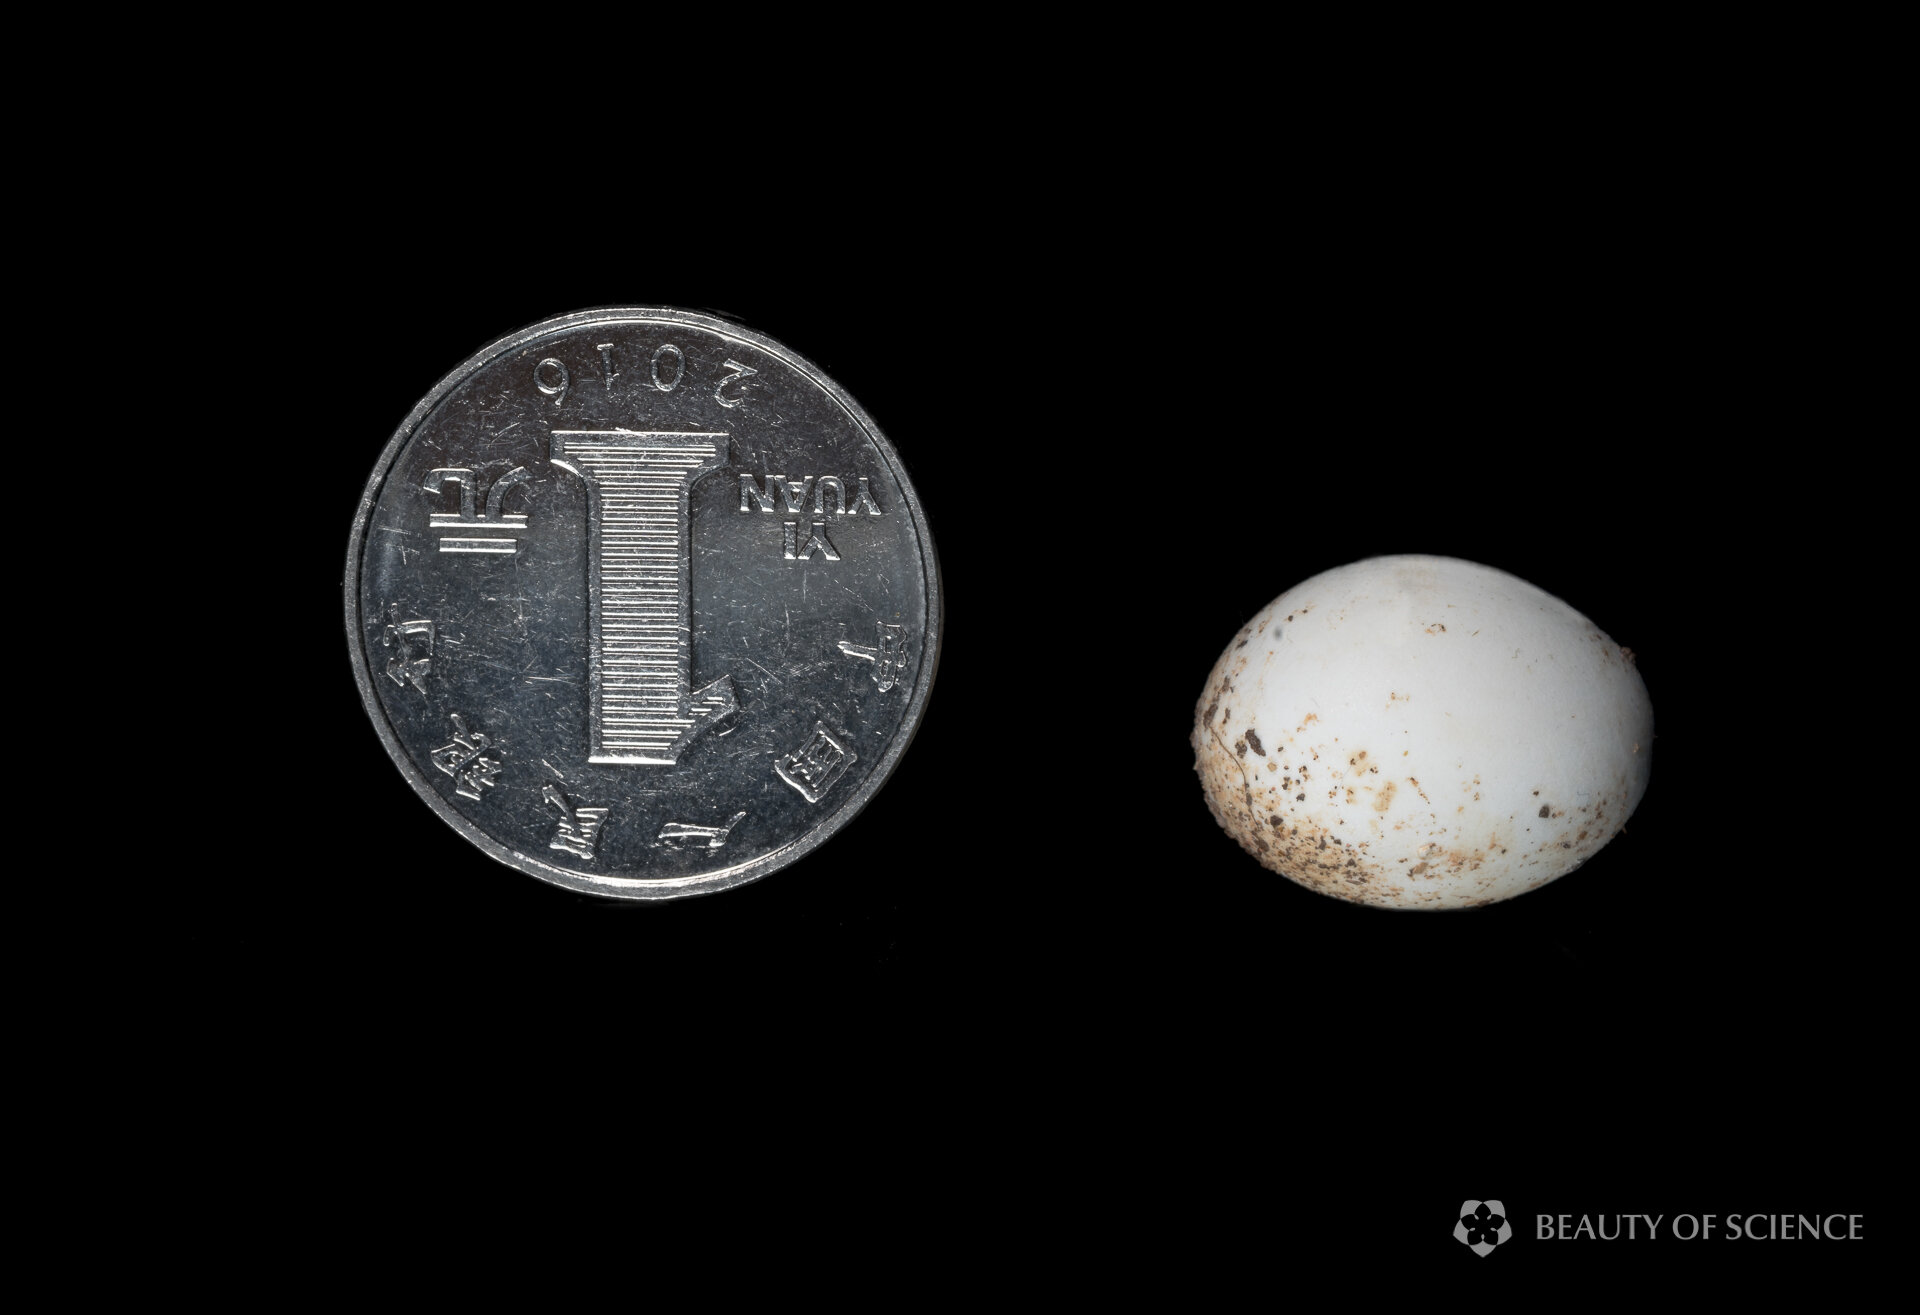  The egg is smaller than a coin with a diameter of 25 mm. 